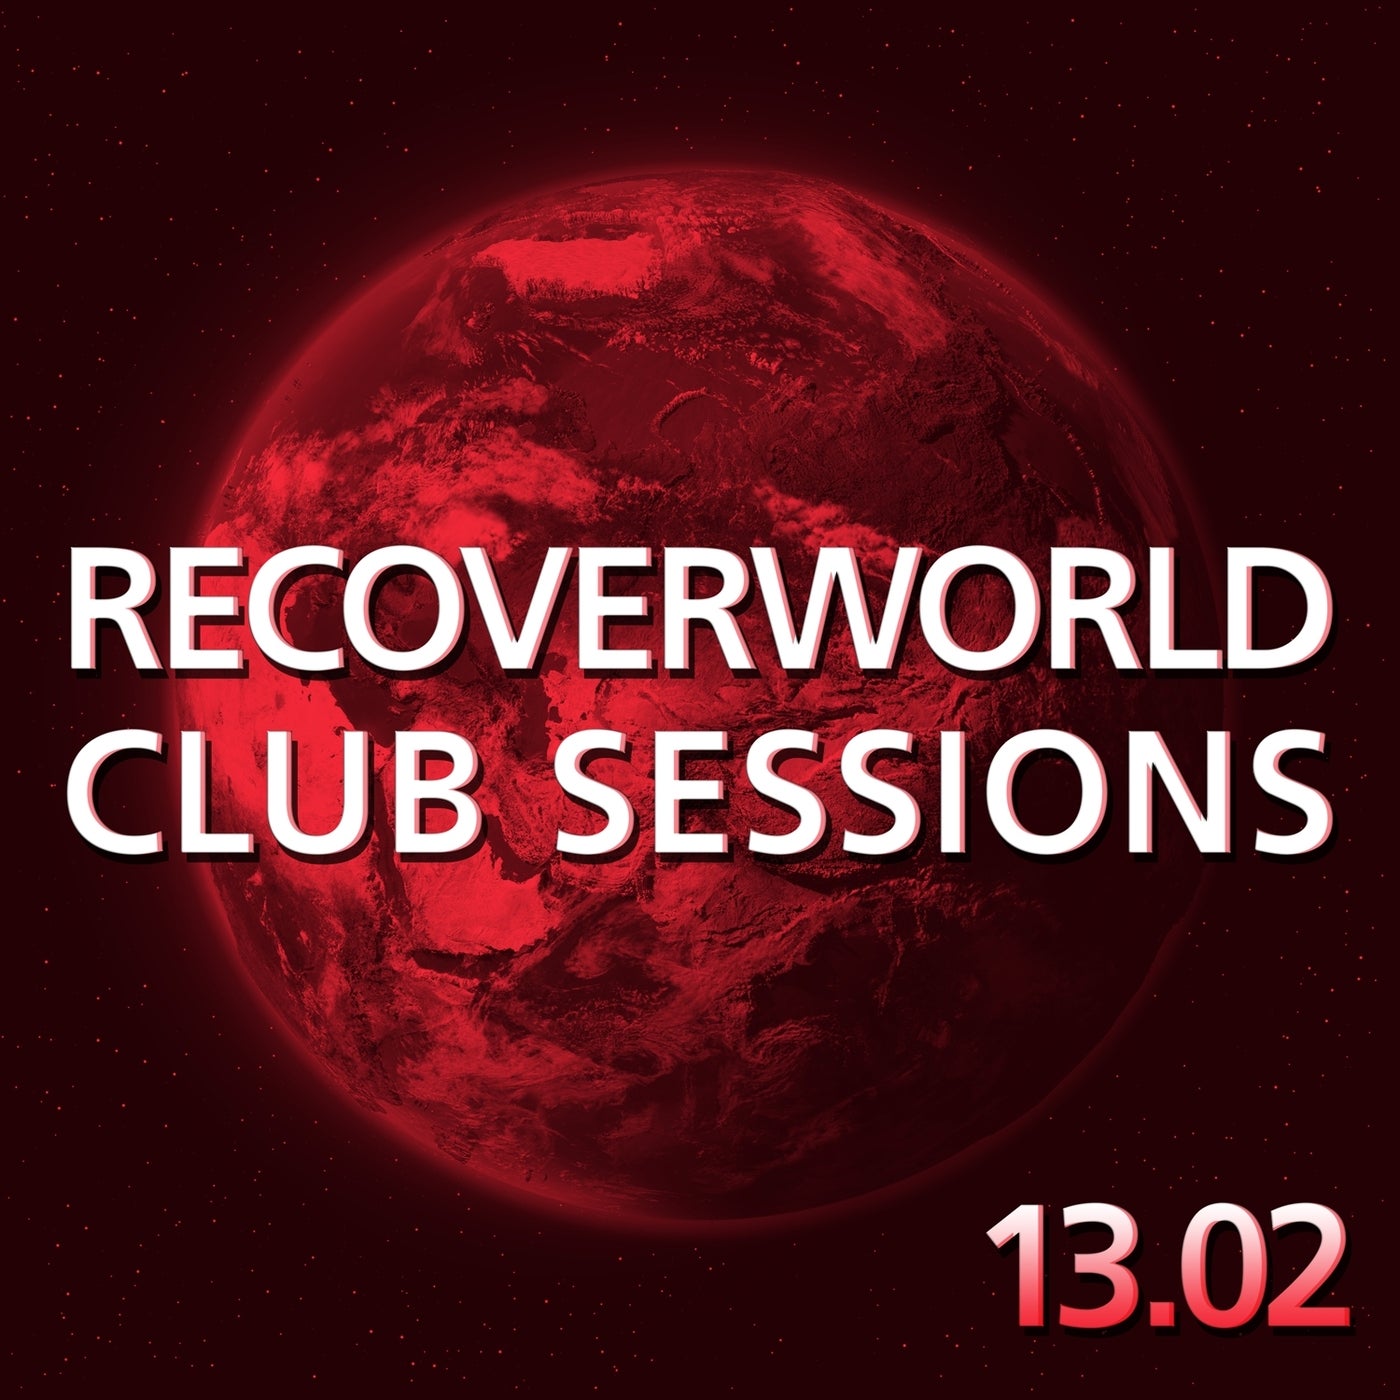 Recoverworld Club Sessions 13.02